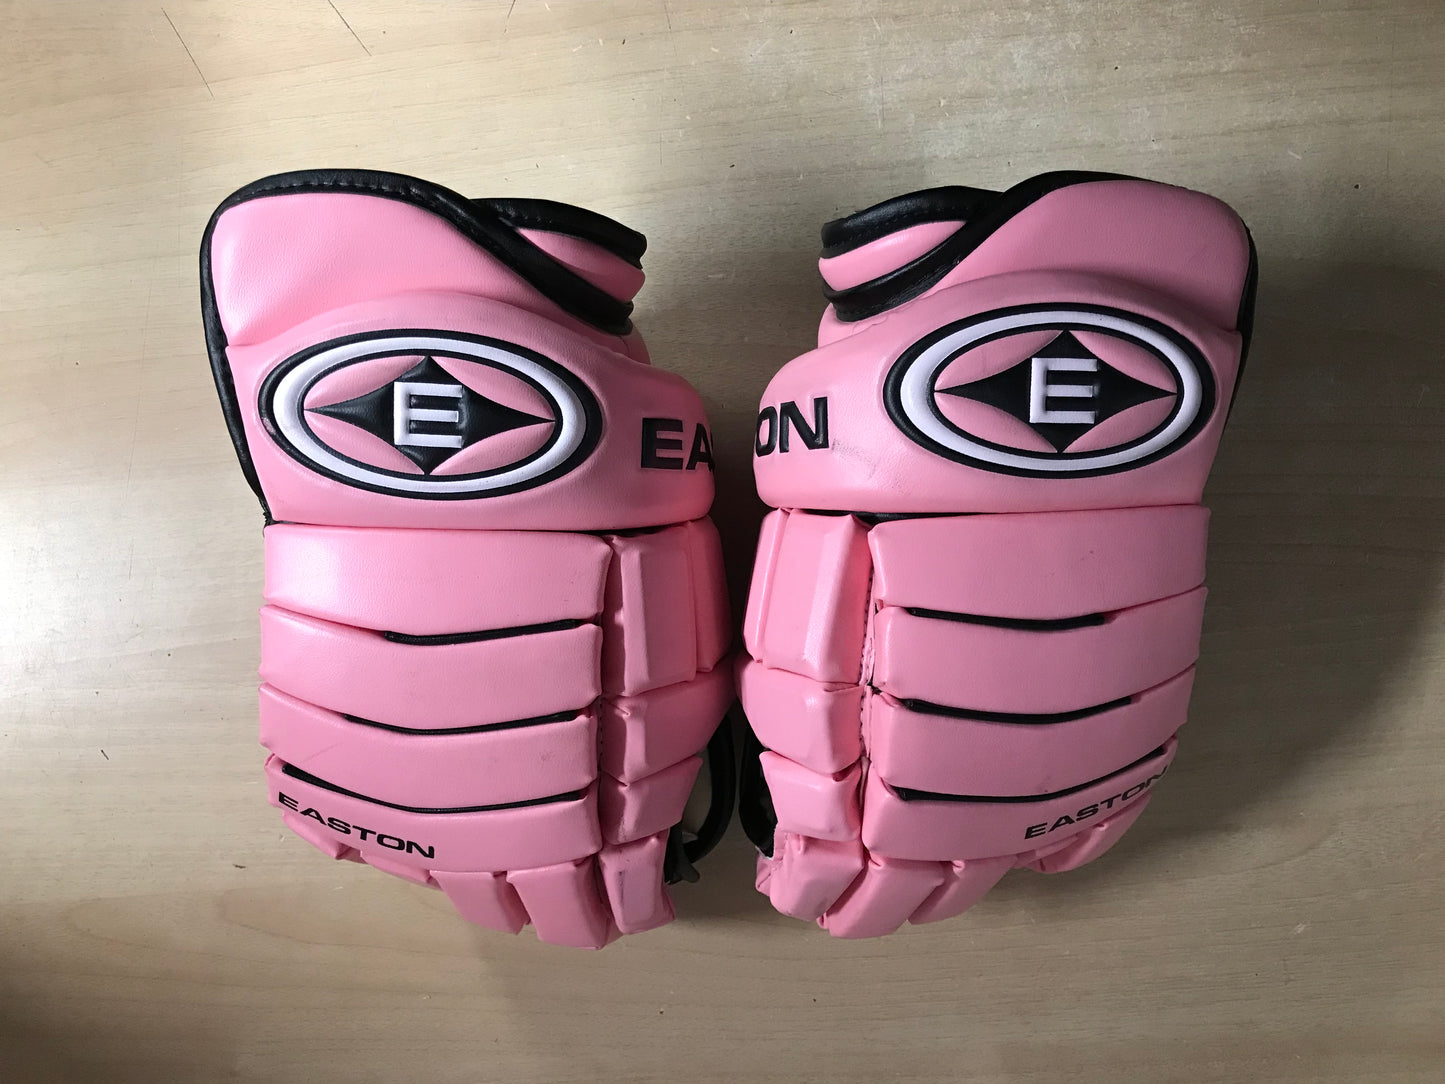 Hockey Gloves Ladies Size 13 inch Easton Pink Excellent